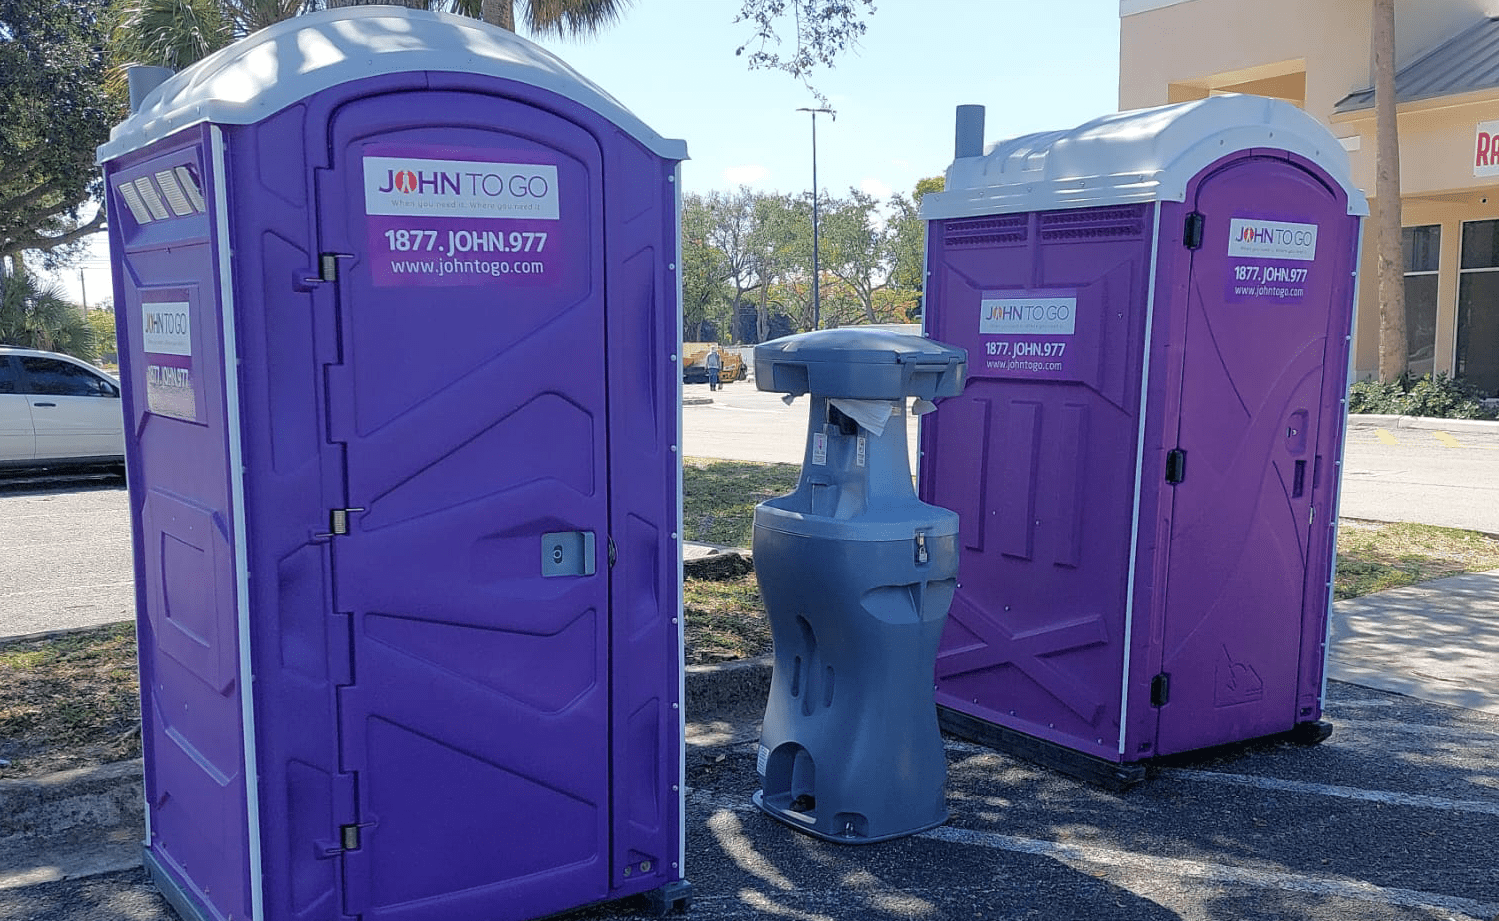 Portable hand washing station between porta potties at outdoor event